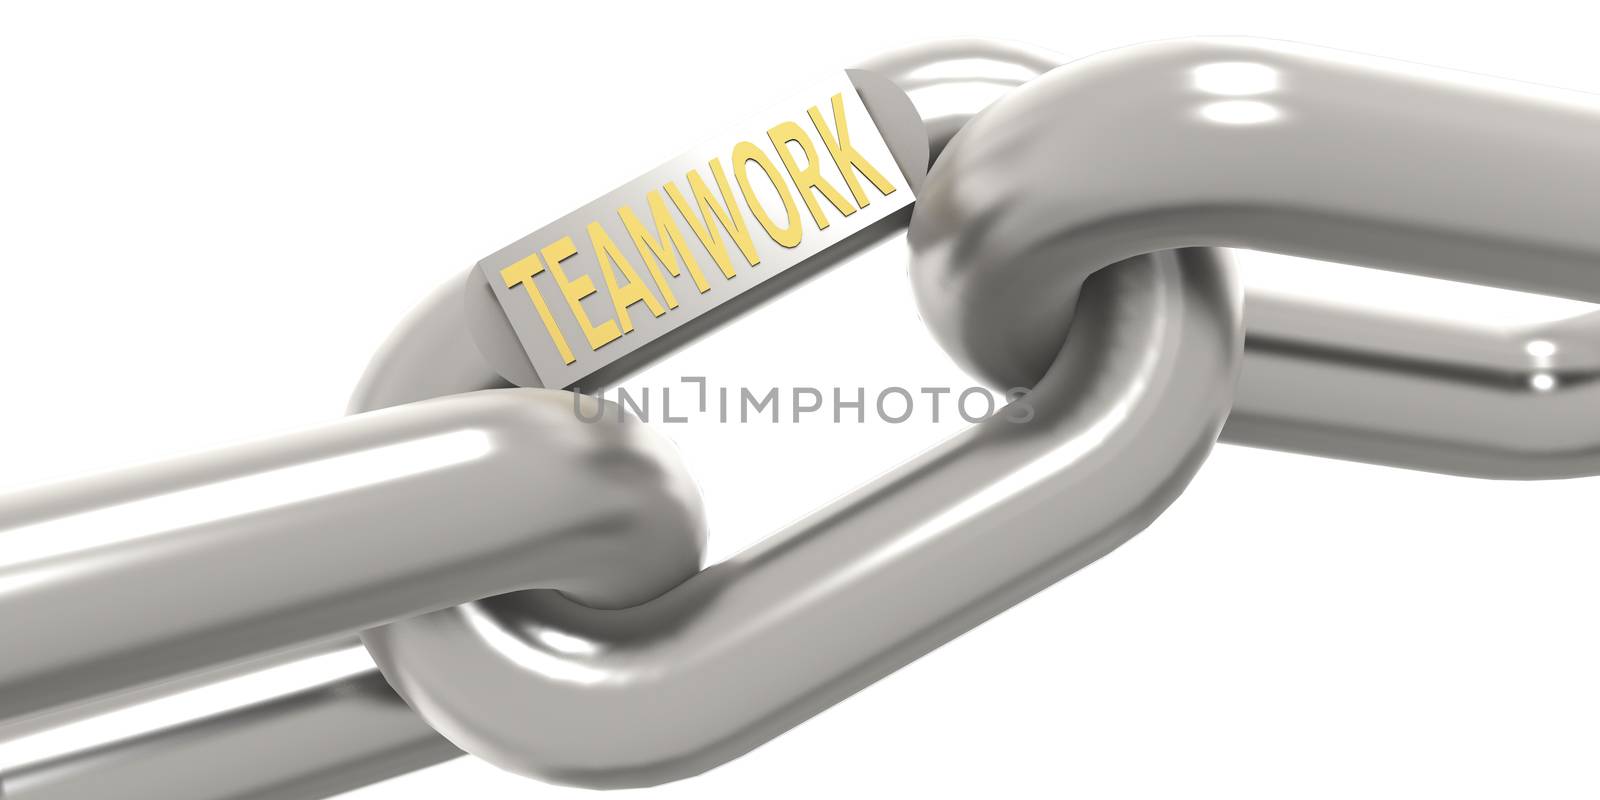 Metal chain with teamwork word by tang90246